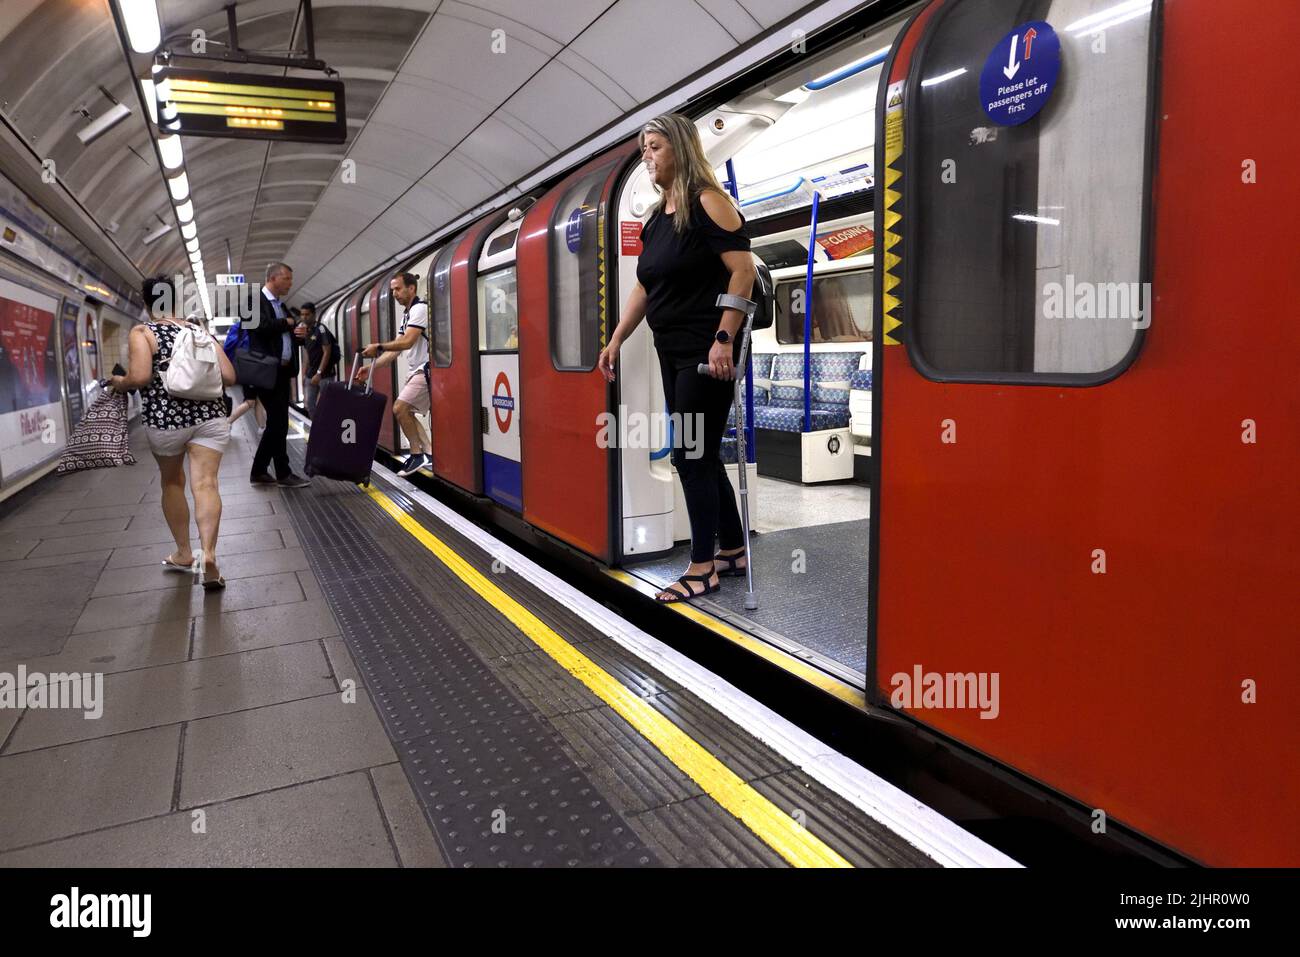 London, England, UK. London Underground - woman with an elbow crutch getting off a tube train Stock Photo